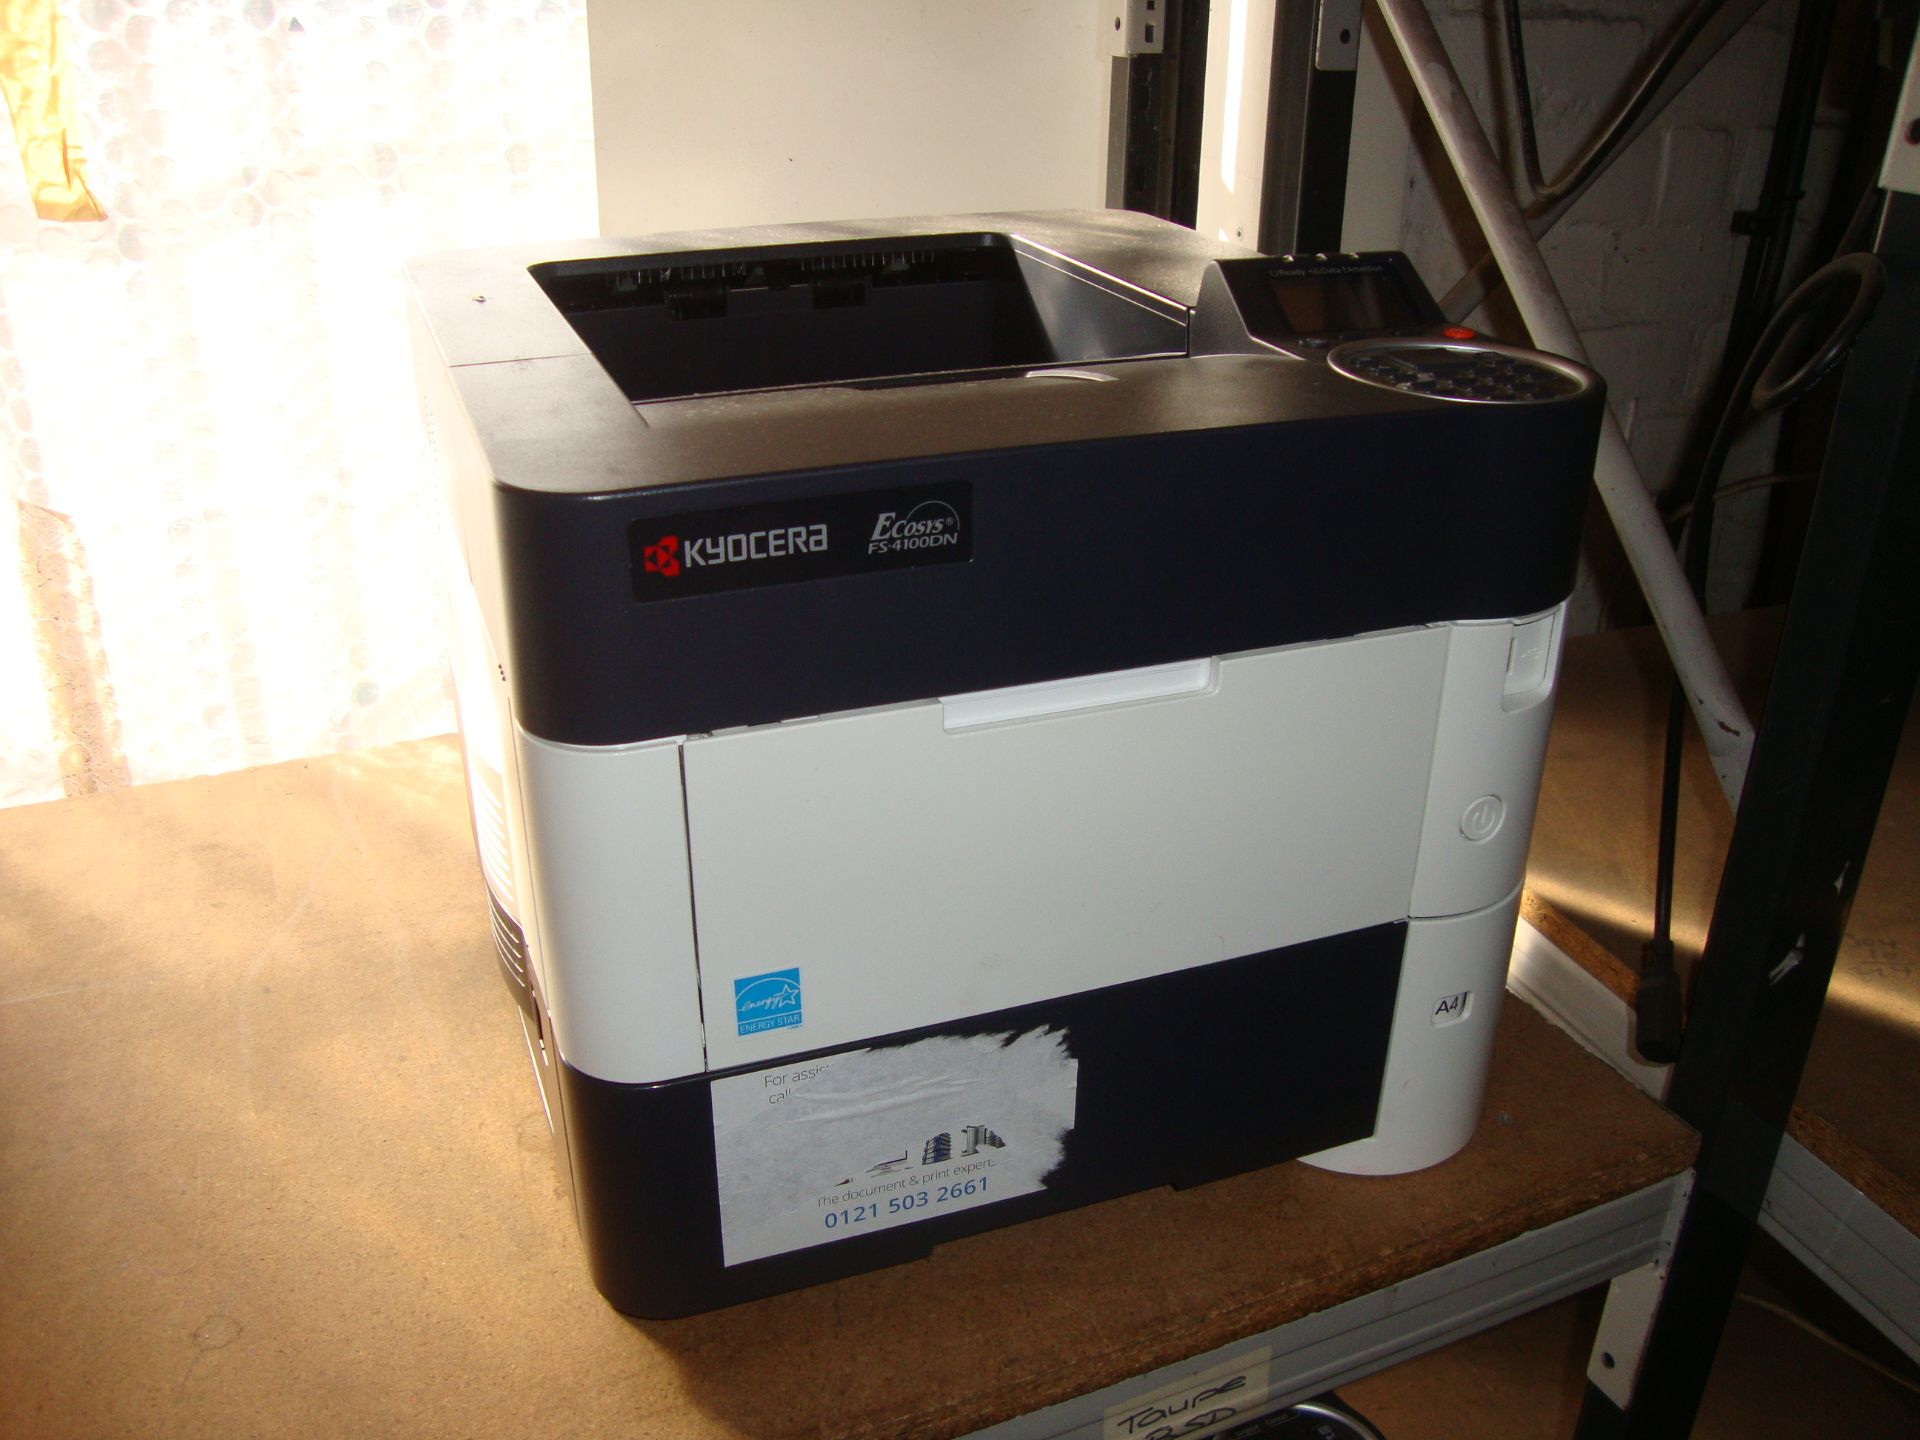 3 off Kyocera model FS-4100DN A4 monolaser printers with up to 1,200 DPI resolution, 45 pages per - Image 4 of 5